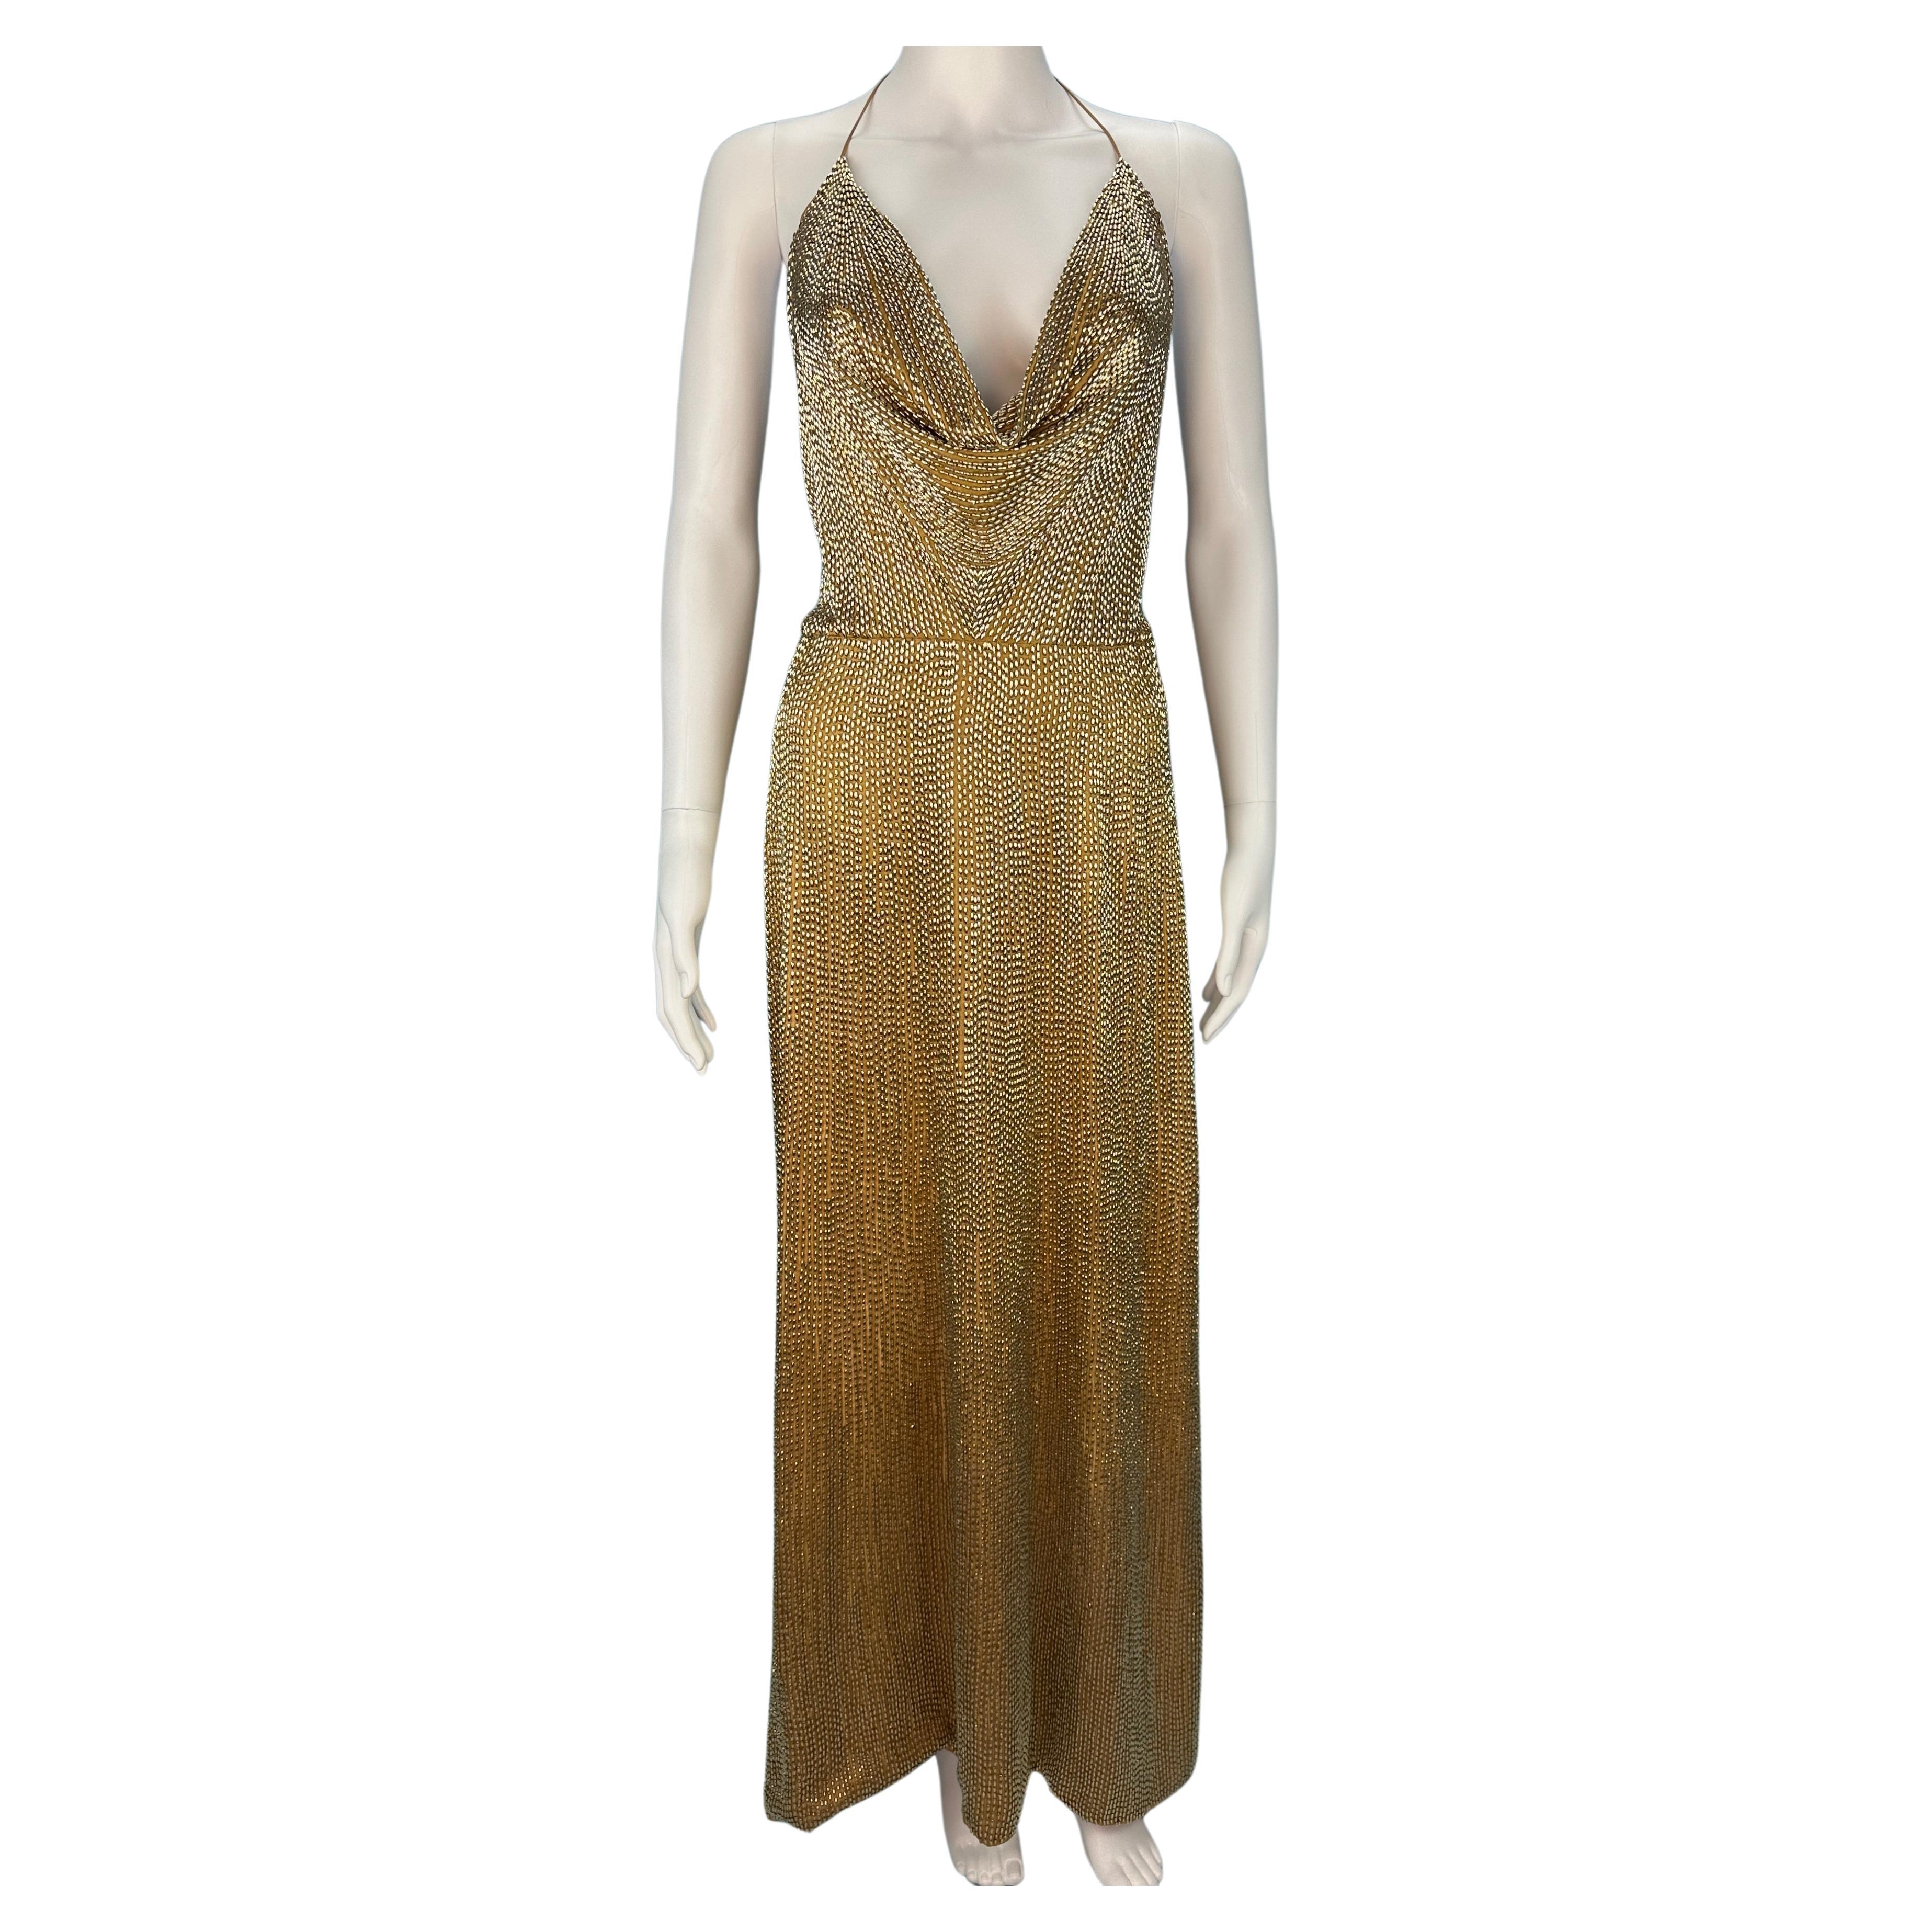 Gucci Fall 2006 Runway Gold Beaded Halter Gown Dress For Sale